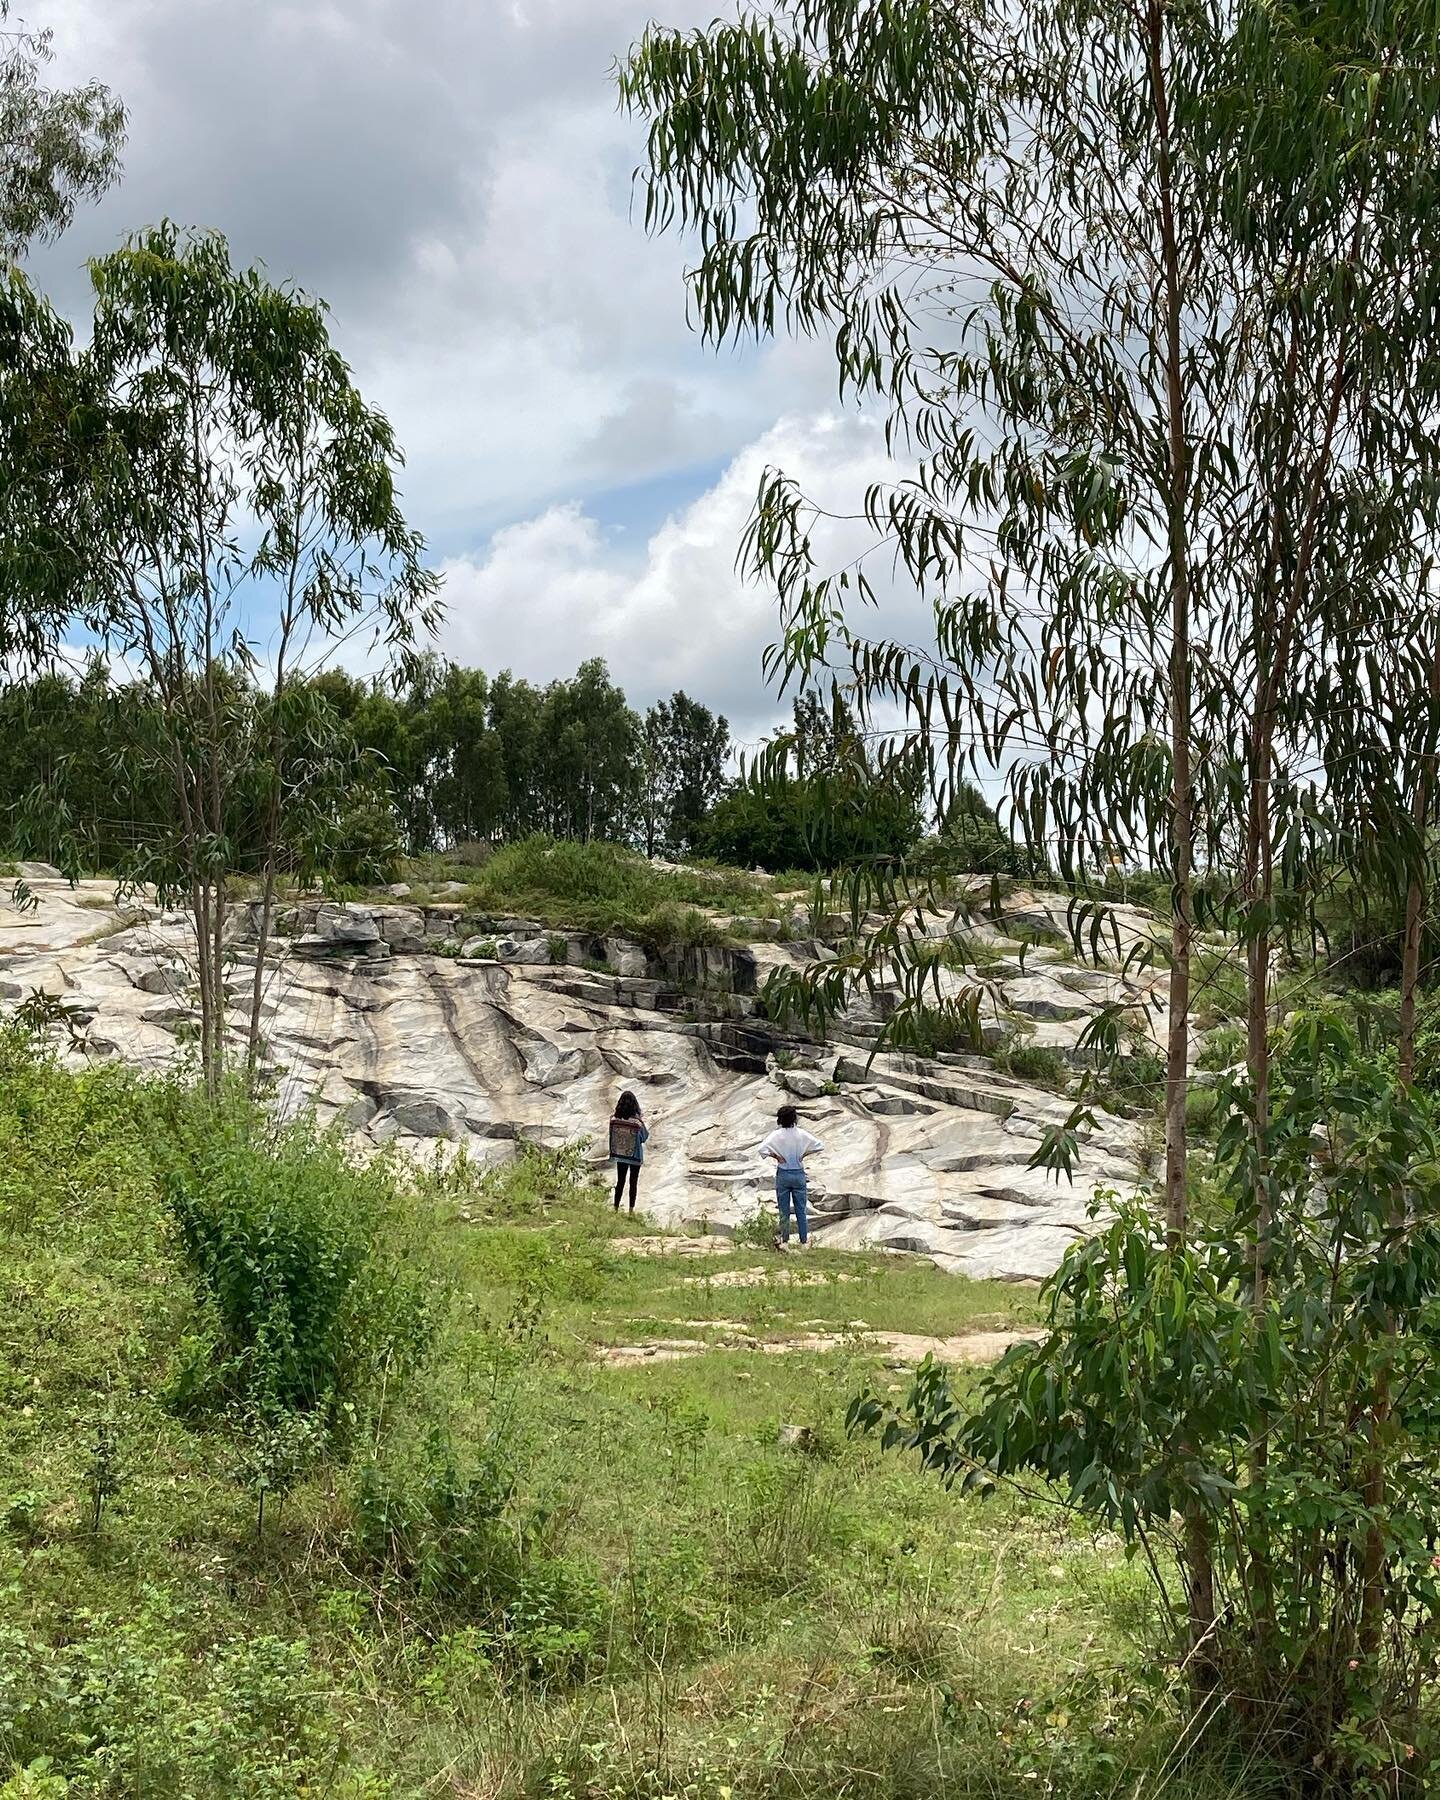 @theelephantpond has a beautiful stone quarry in its vicinity which is the perfect place to see the sunrise. An easy walk from the tiny house and you&rsquo;ll see natural pond around the stone quarry. Get your dog to the pond and we&rsquo;re sure the